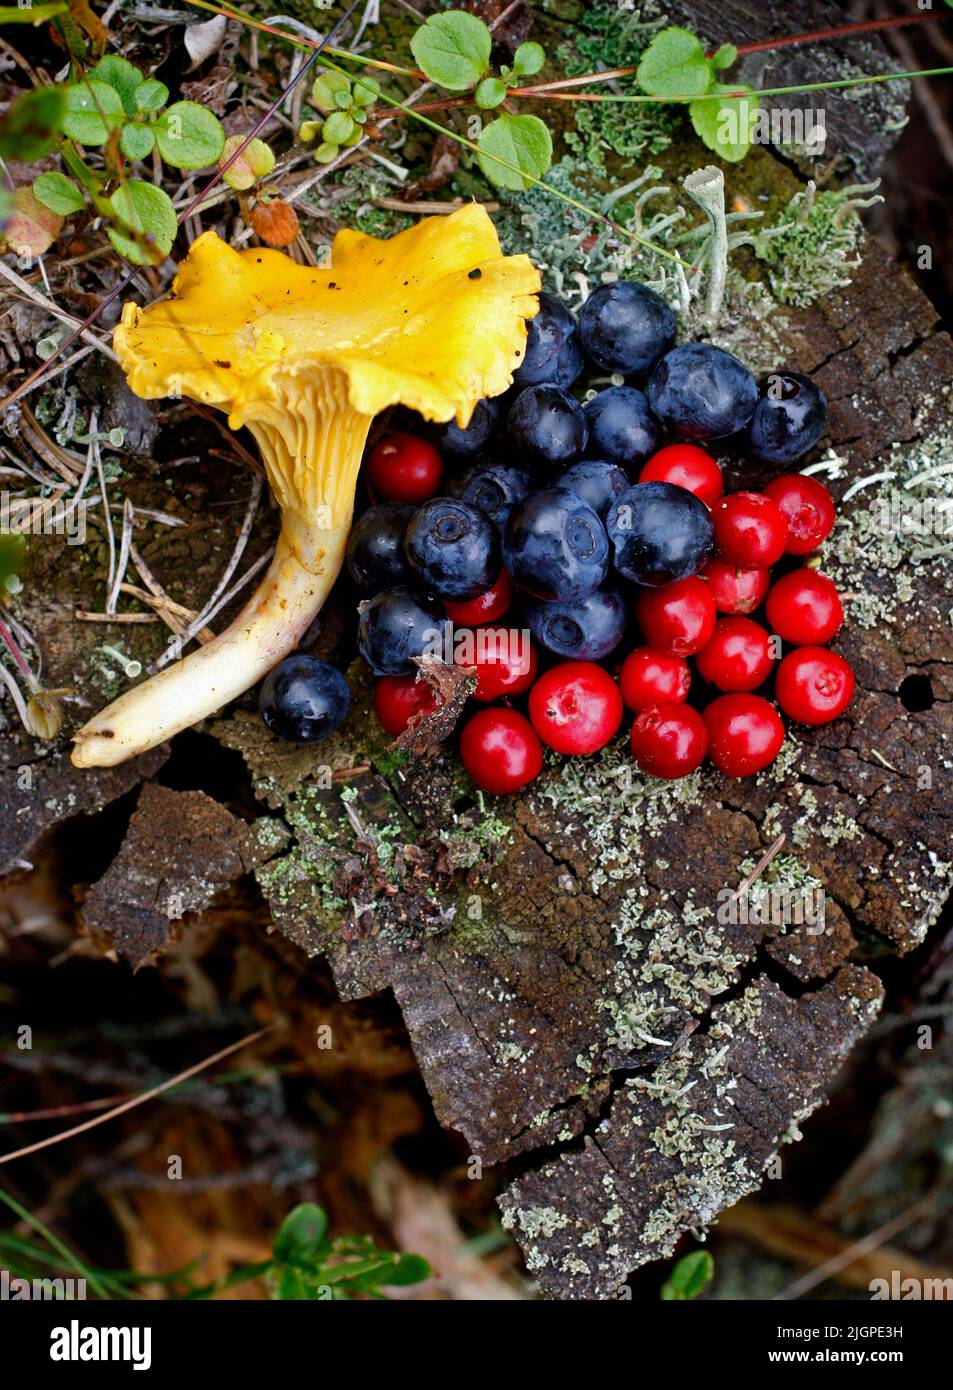 Yellow chanterelles, blueberries and lingonberries on a tree stump in a forest. Stock Photo